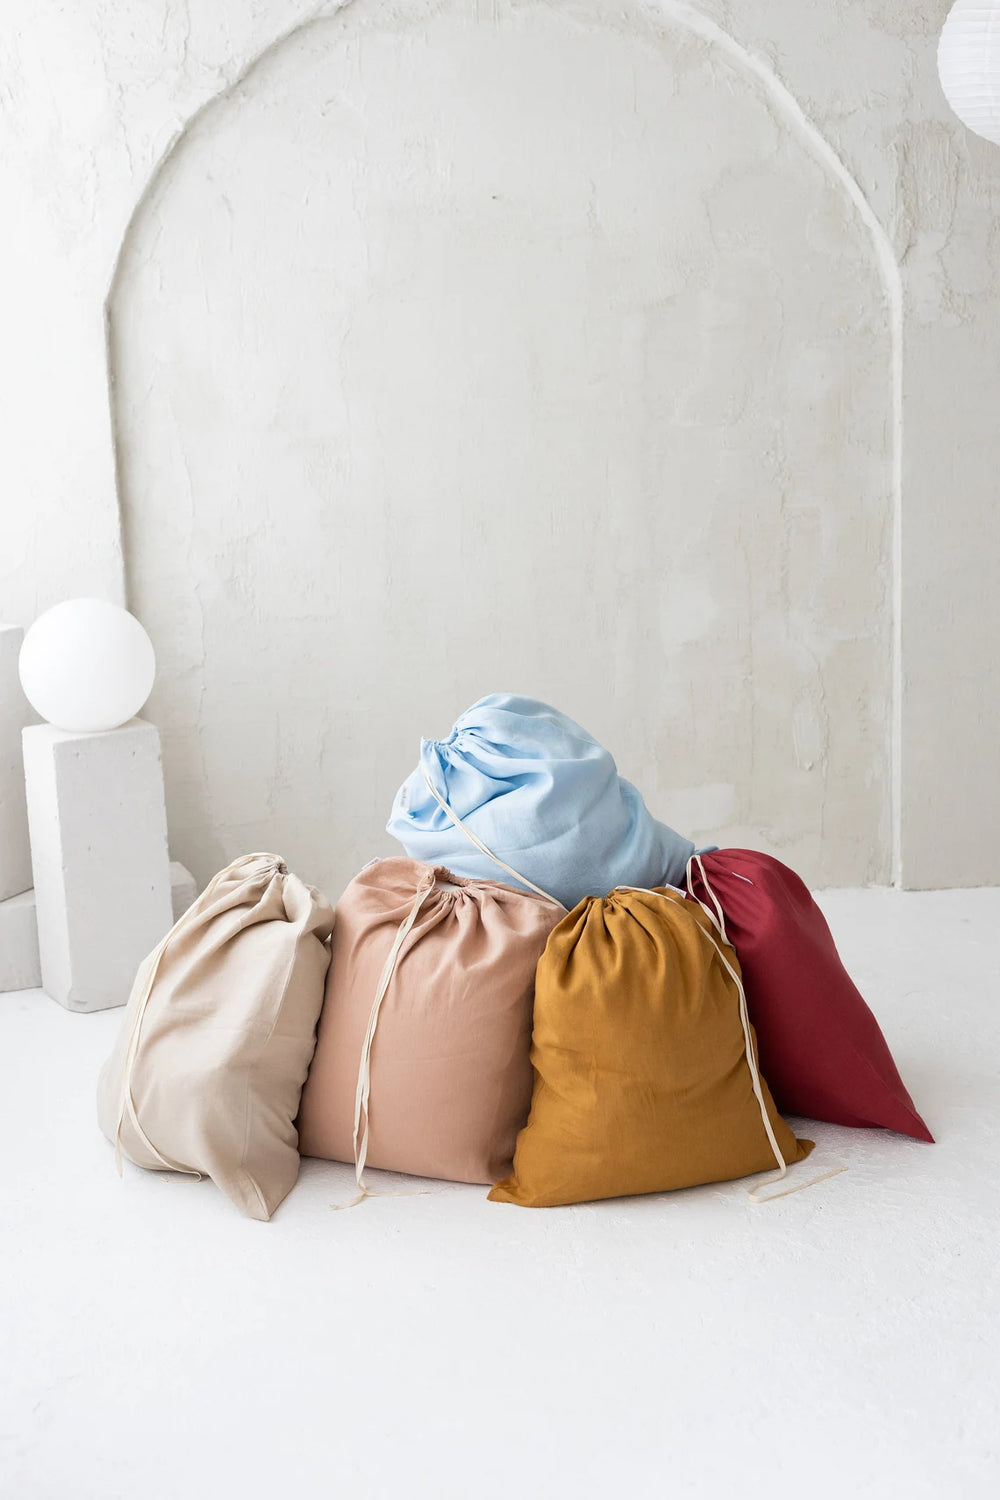 Linen Laundry Bag In Amber Yellow 1 - Daily Linen